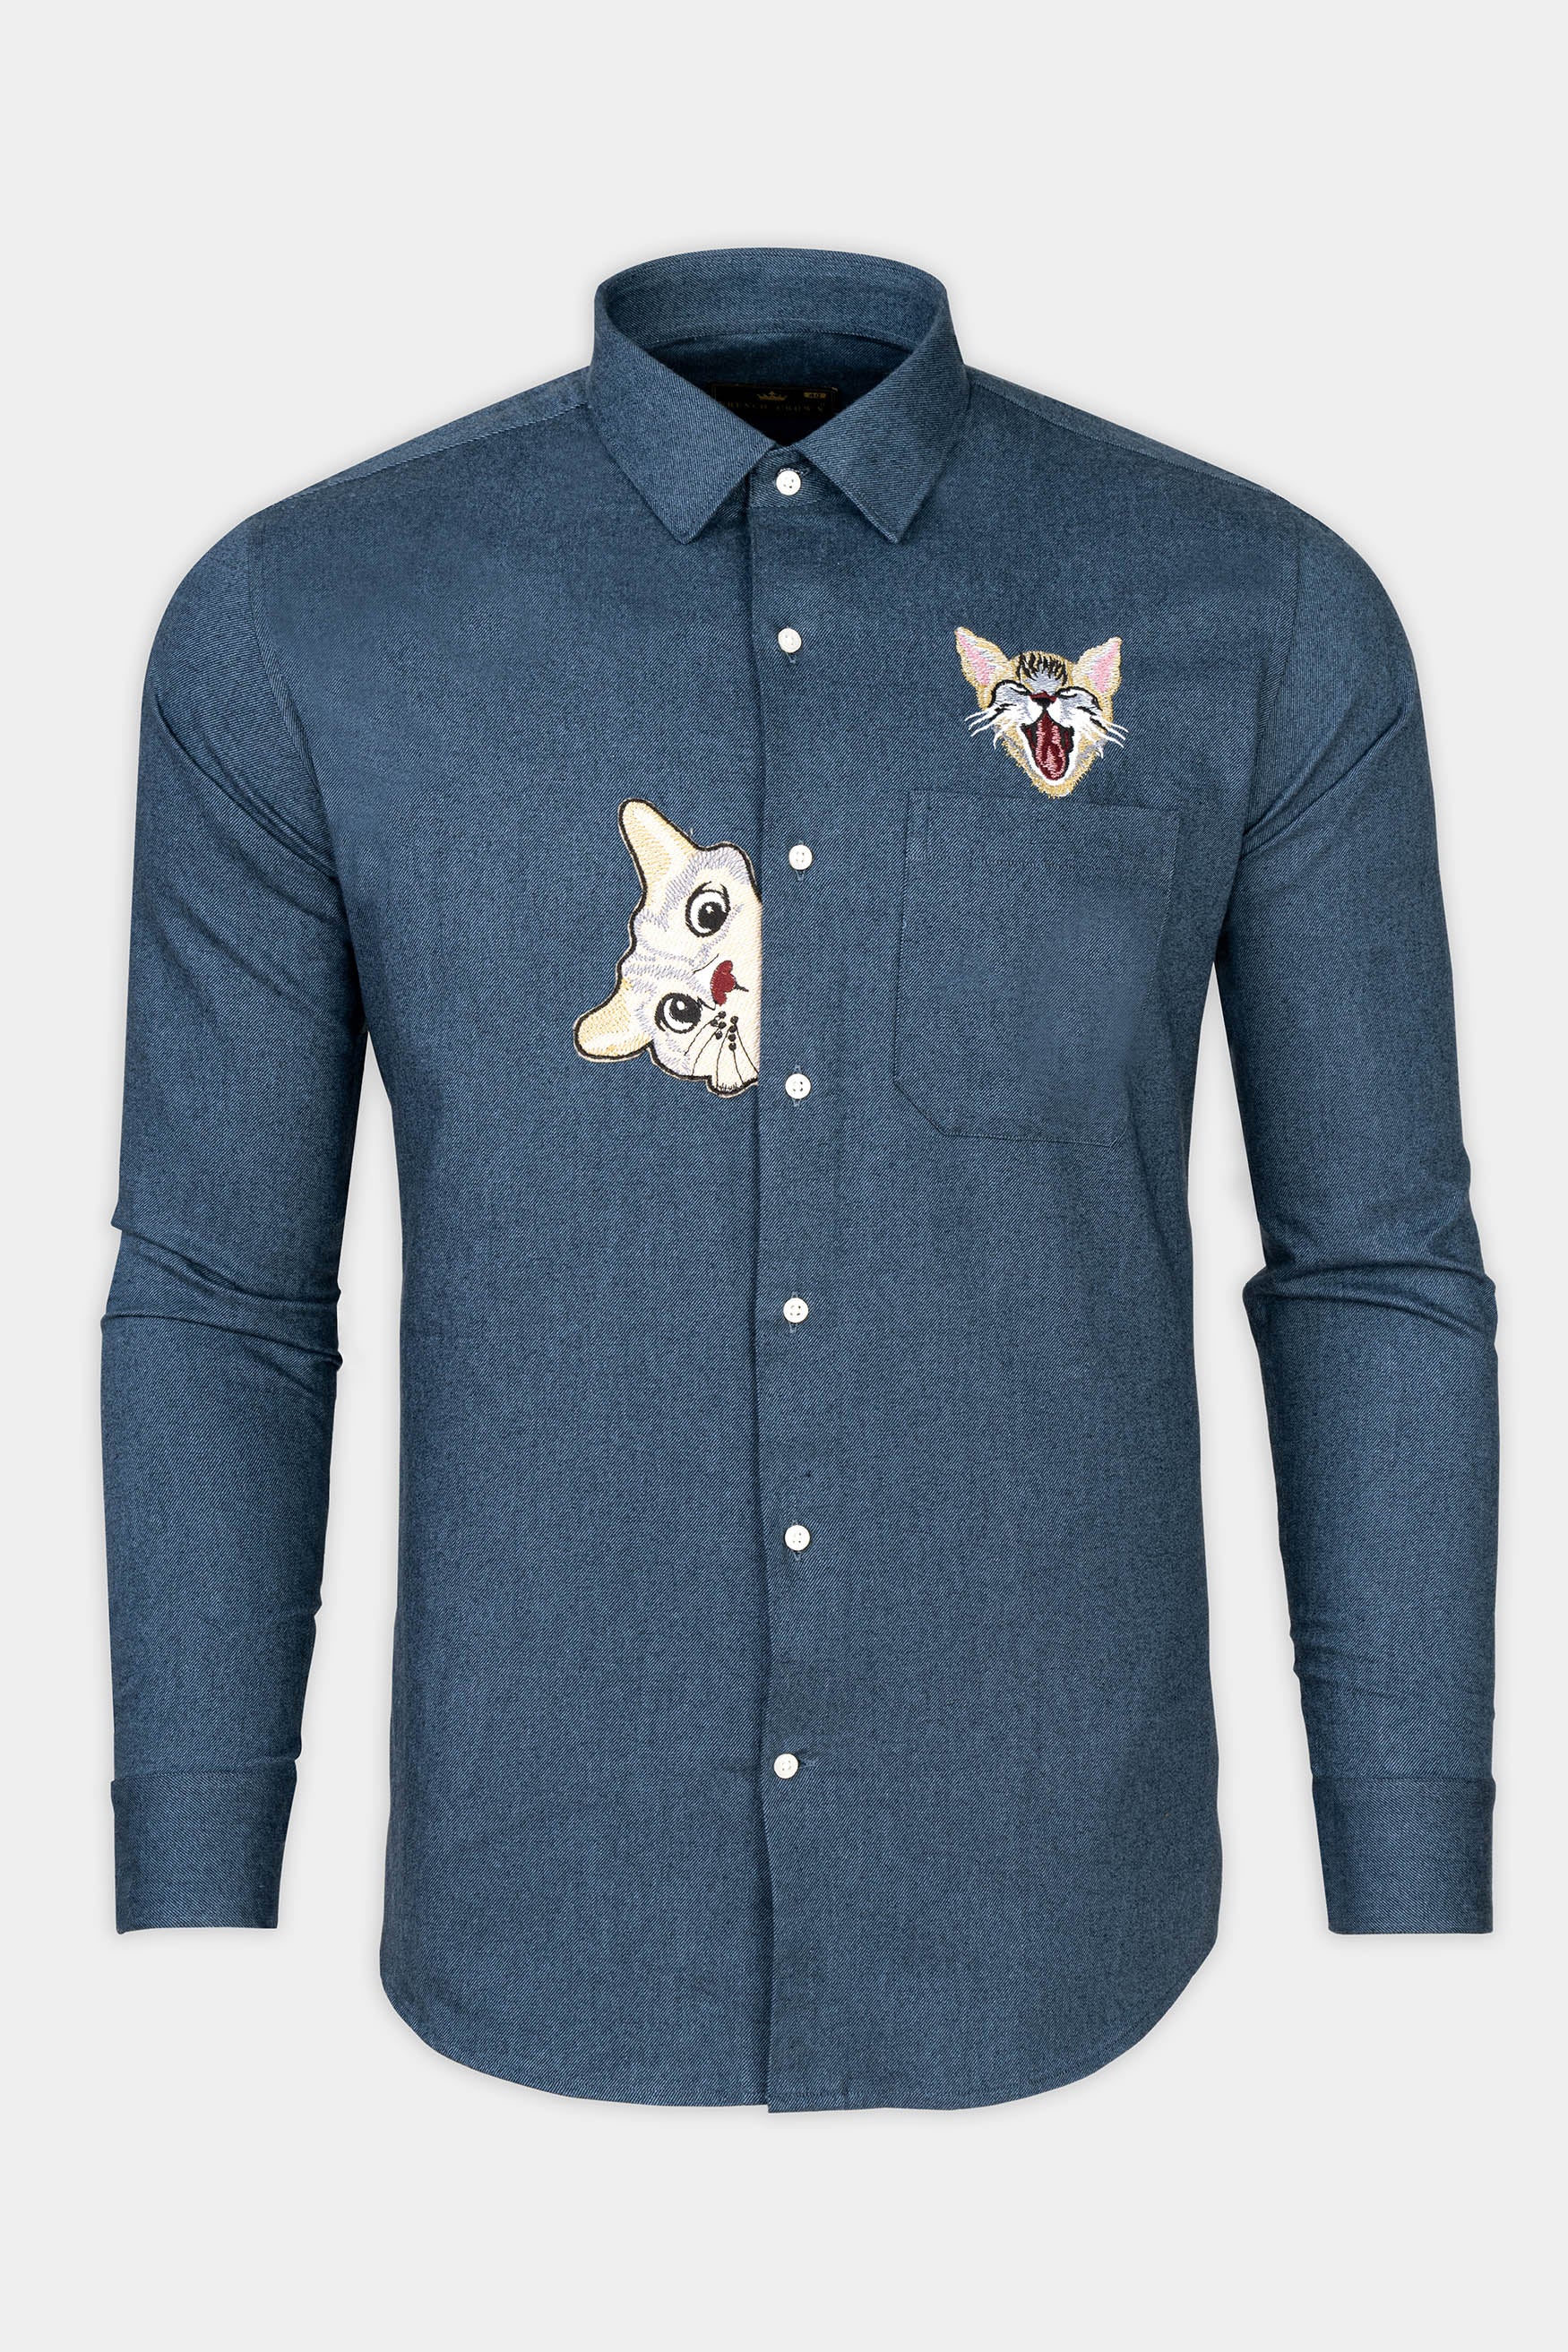 Mulled Wine Gray Cats Embroidered Flannel Designer Shirt 12176-P559-38, 12176-P559-H-38, 12176-P559-39, 12176-P559-H-39, 12176-P559-40, 12176-P559-H-40, 12176-P559-42, 12176-P559-H-42, 12176-P559-44, 12176-P559-H-44, 12176-P559-46, 12176-P559-H-46, 12176-P559-48, 12176-P559-H-48, 12176-P559-50, 12176-P559-H-50, 12176-P559-52, 12176-P559-H-52